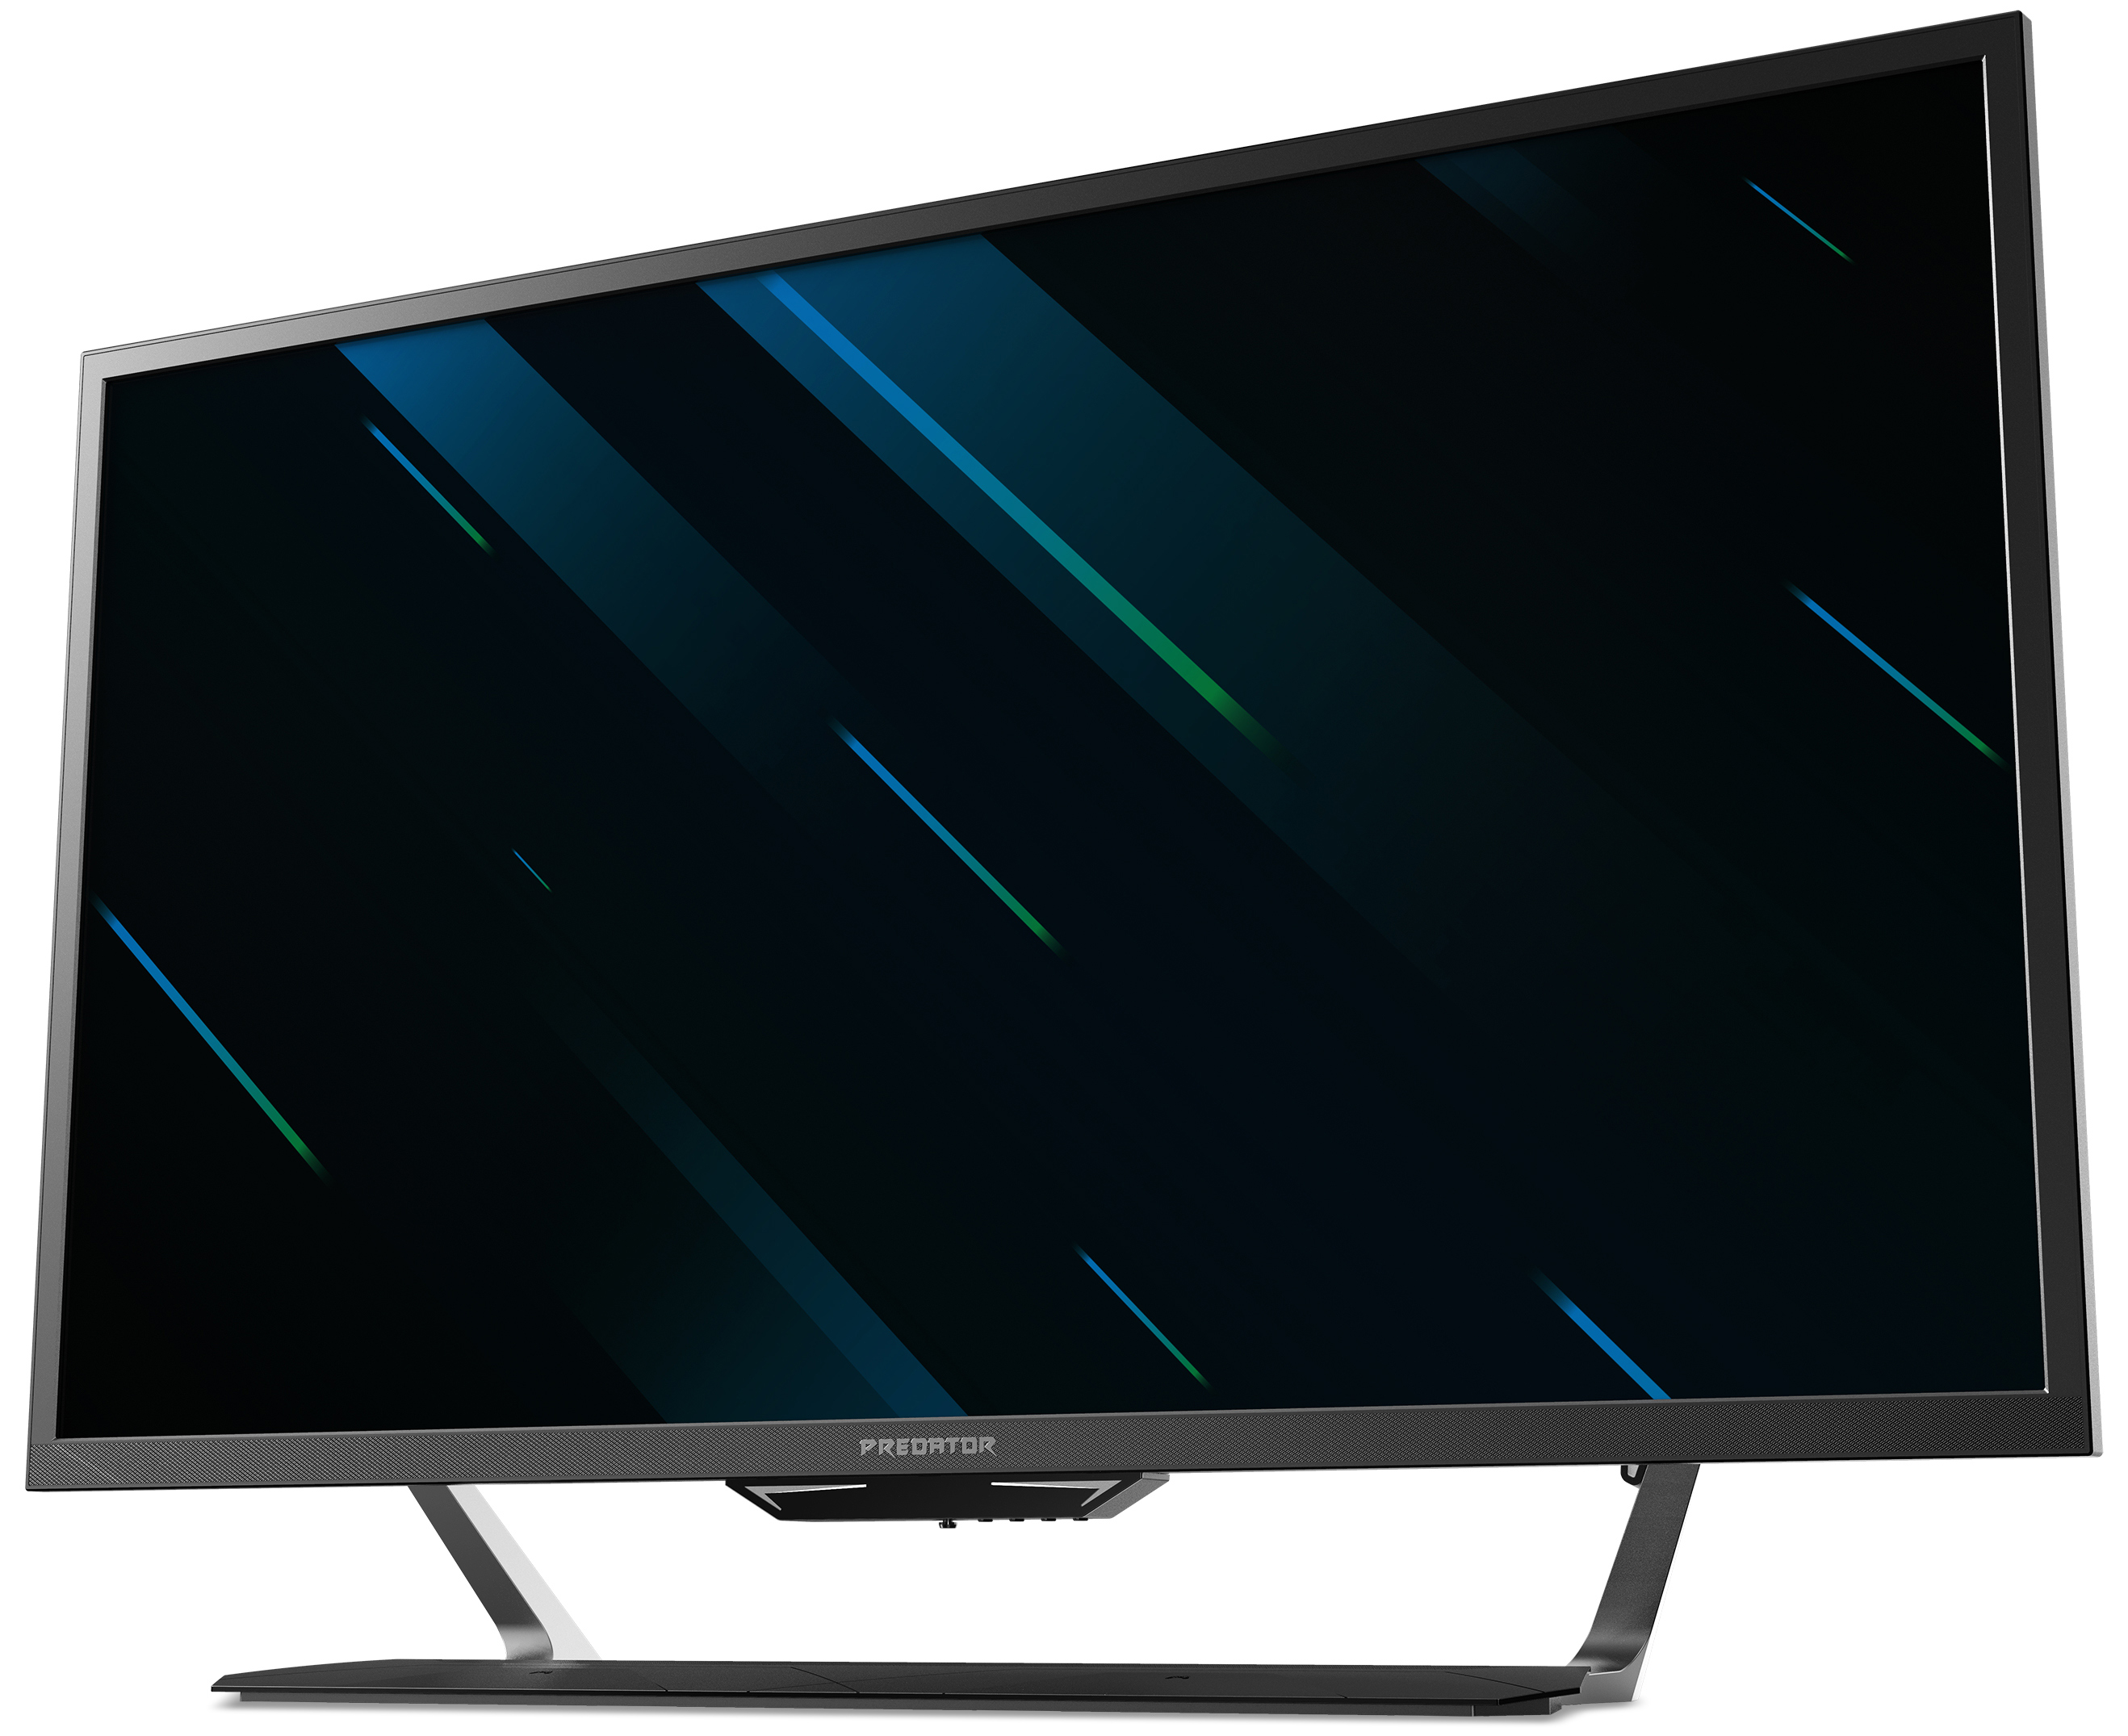 Acer Predator Cg437k P A 43 Inch 144 Hz Gaming Monitor With Freesync And Displayhdr 1000